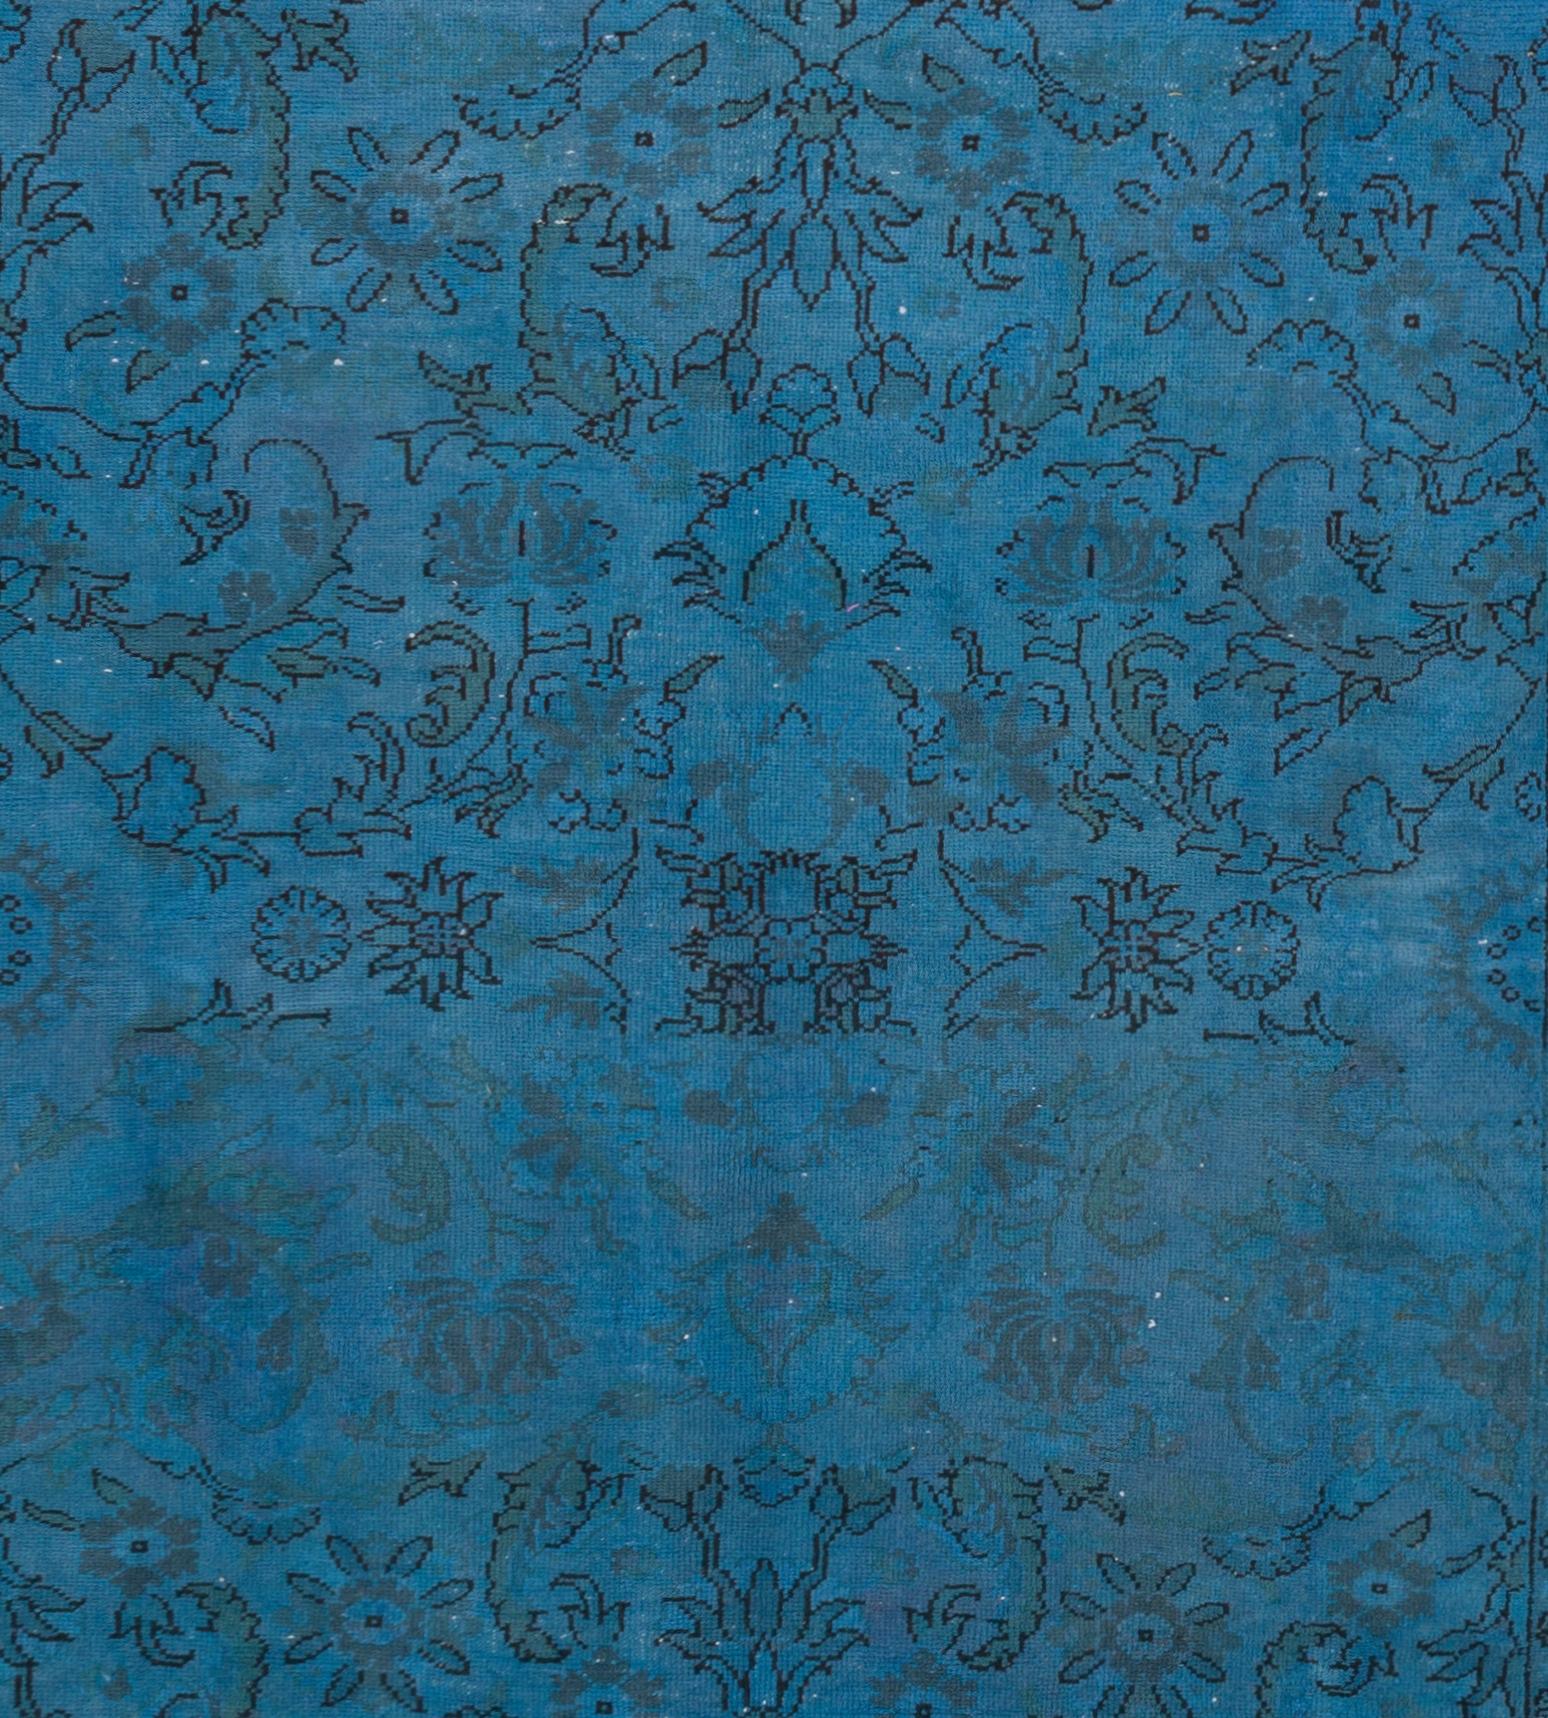 Hand-Woven 1960s Turkish Rug Re-Dyed in Blue Color, Ideal for Contemporary Interiors